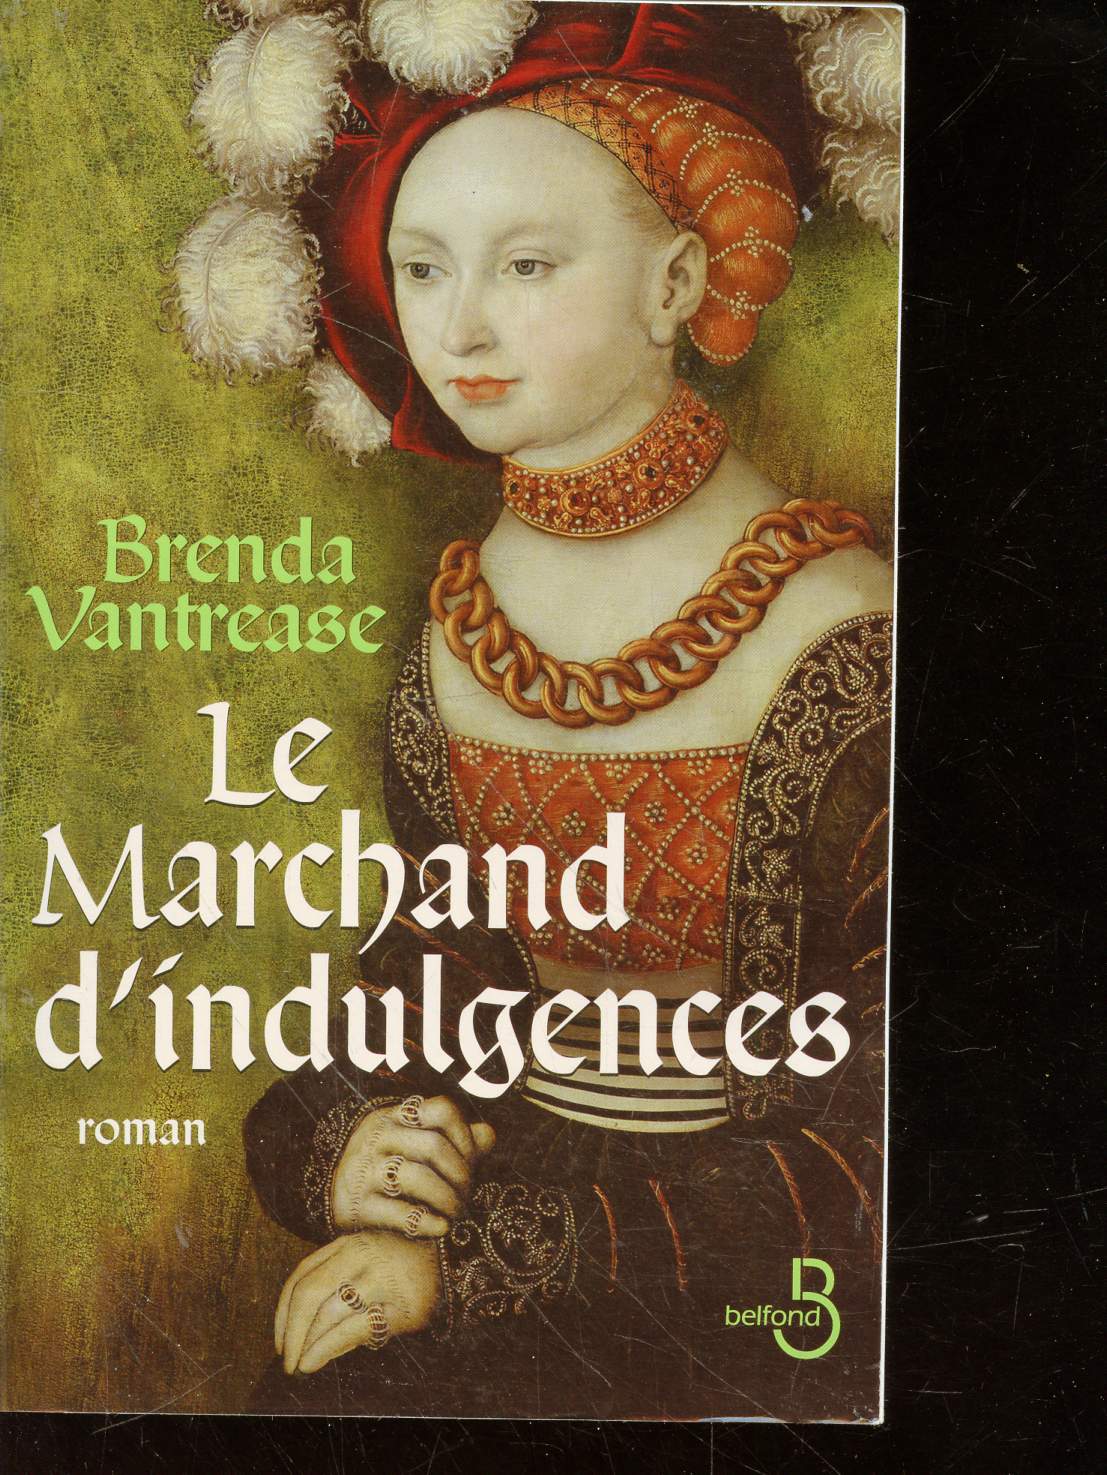 Le marchand d'indulgence